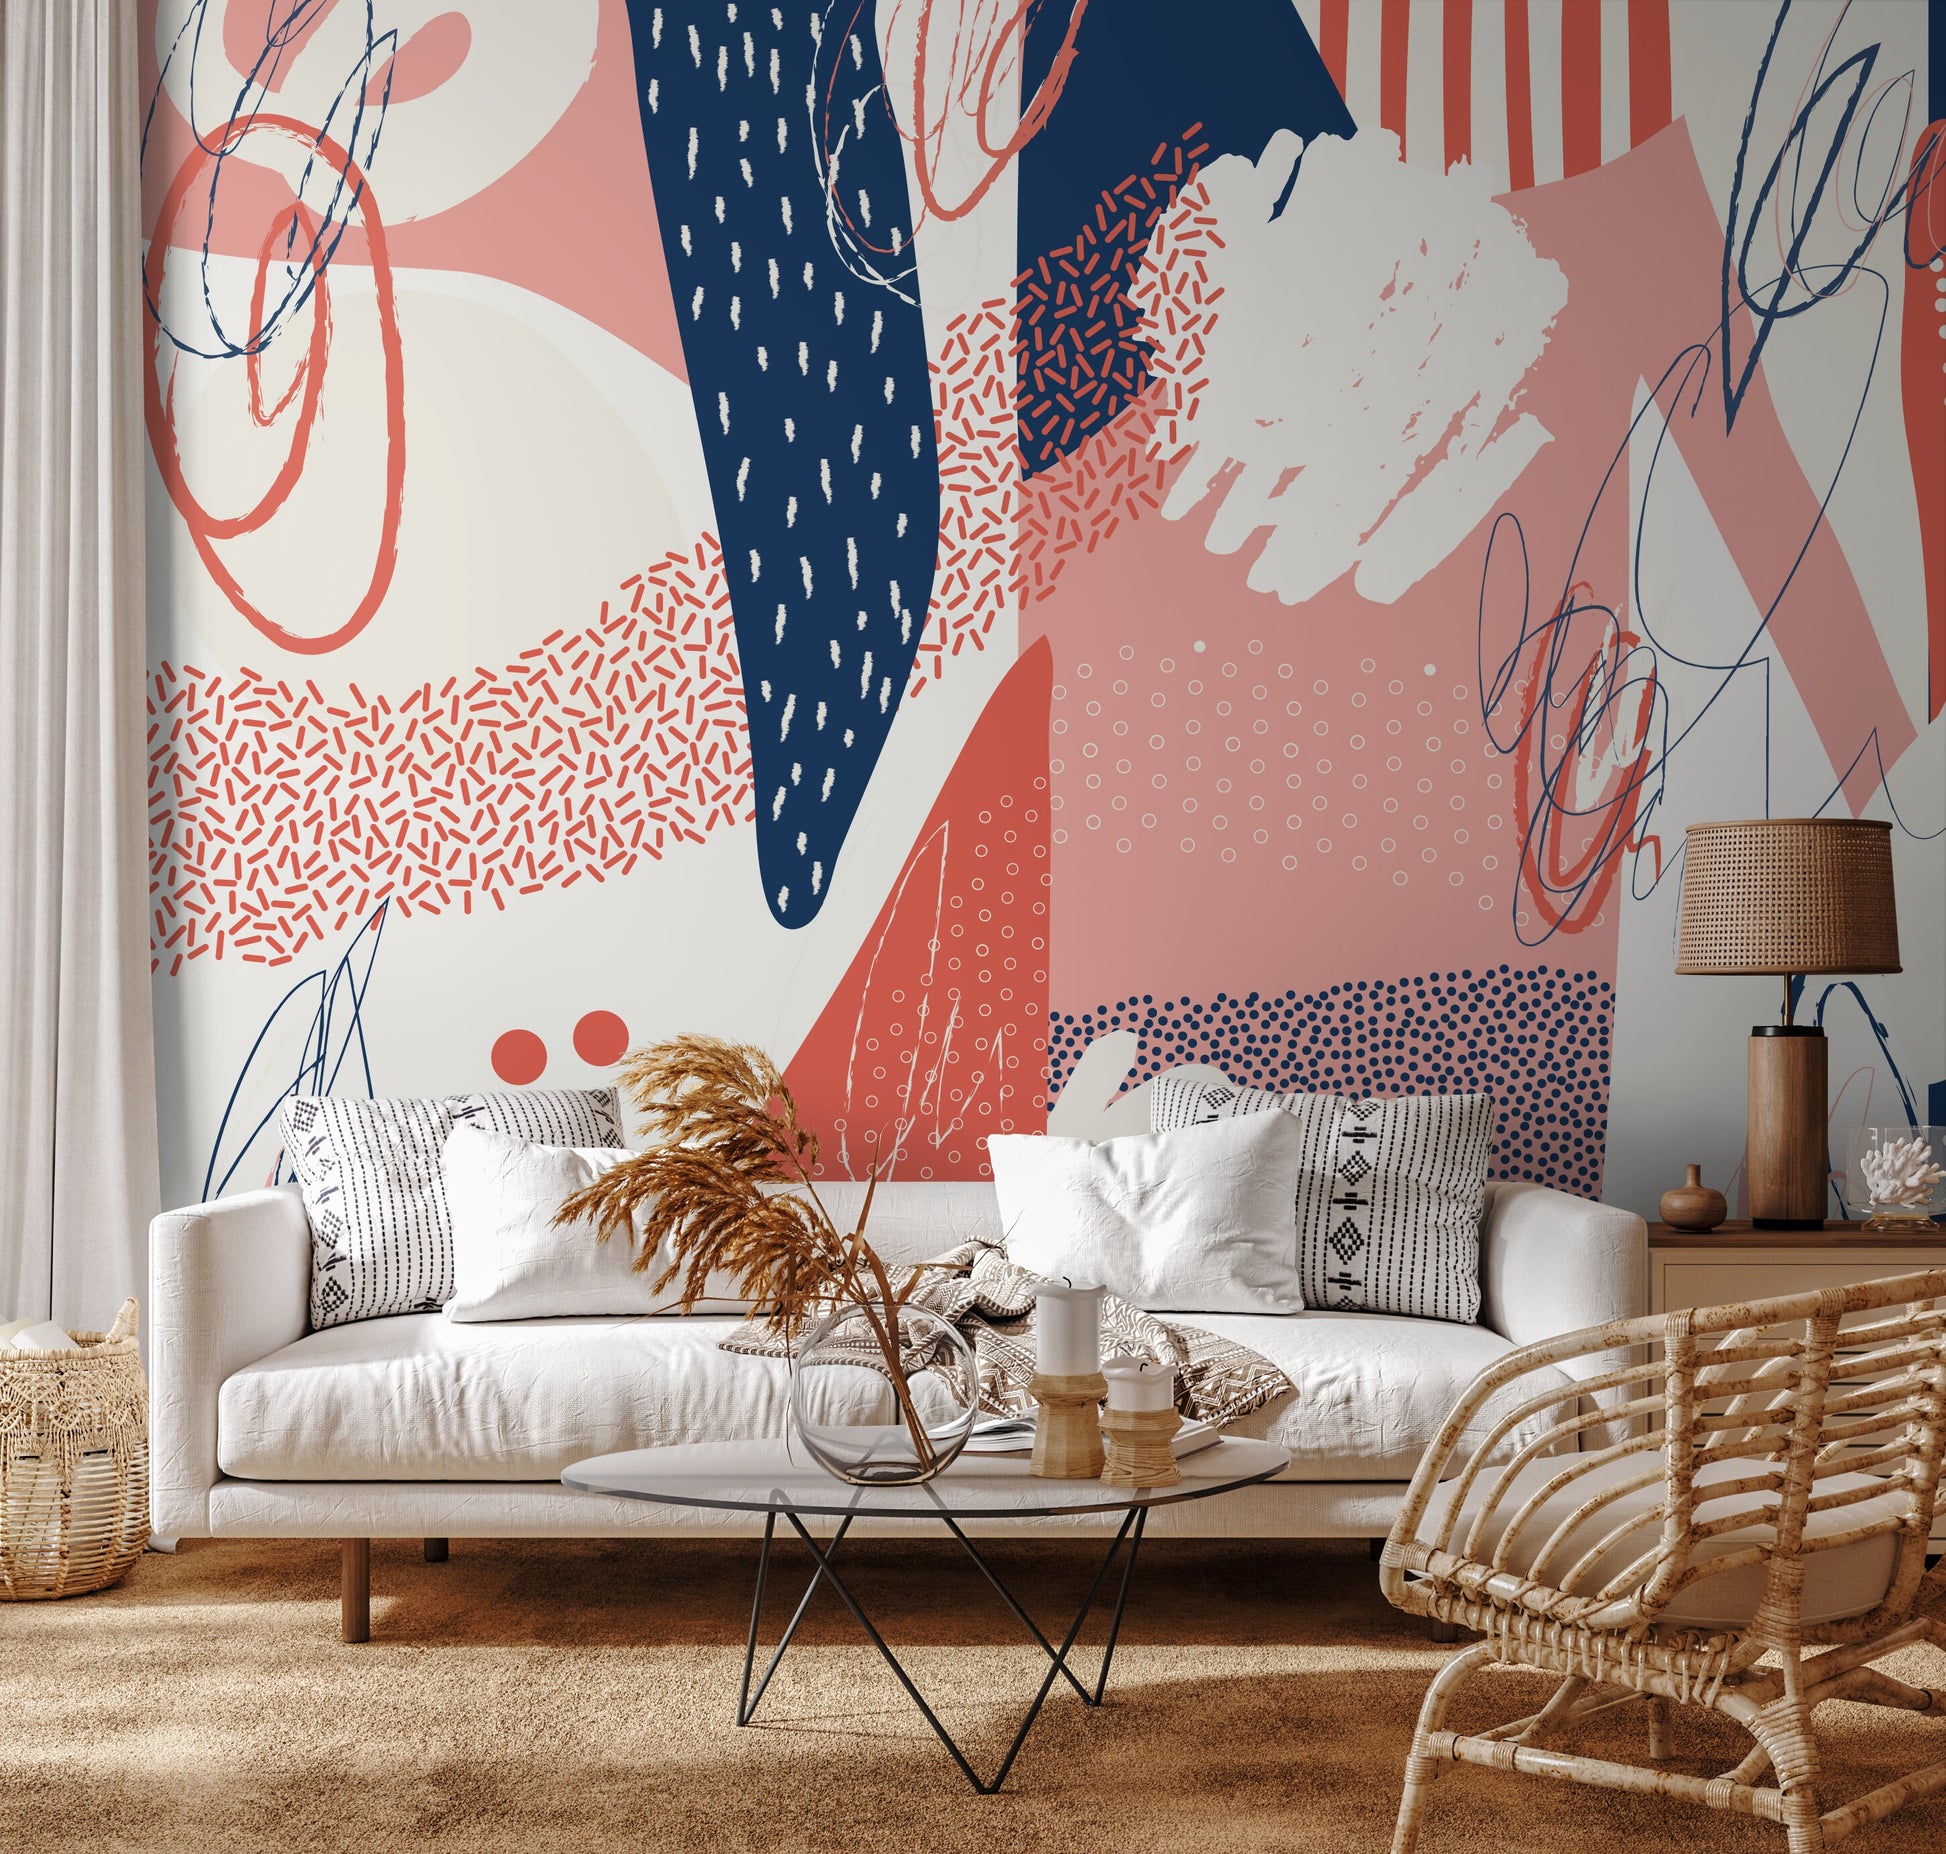 Contemporary Mural Wallpaper Removable Wallpaper Peel and Stick Wallpaper Wall Decor Home Decor Wall Art Printable Wall Art Room Decor Wall Prints - B716